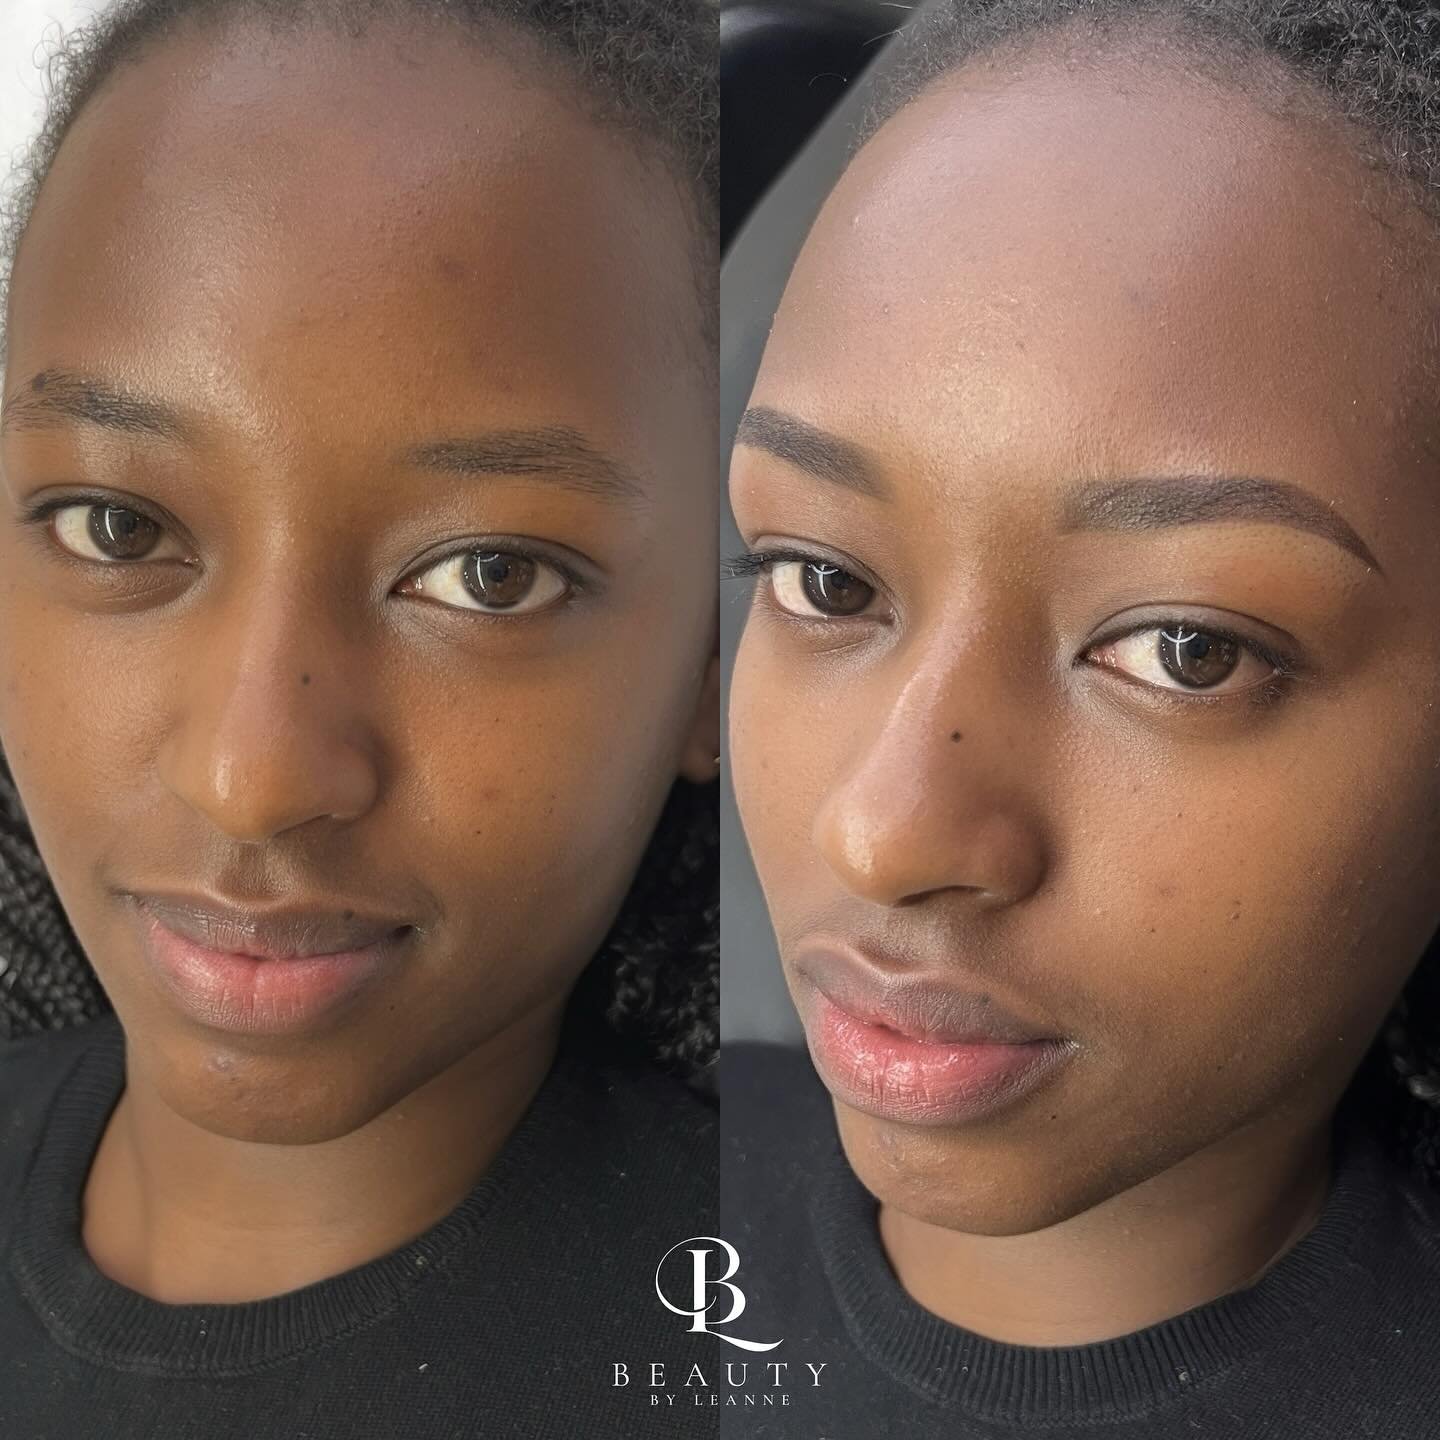 Getting these brows into SHAPE with Powder Brow technique! 😍 We elongated them, created symmetry and lifted her brow tails for a more uplifed effect to the upper facial anatomy. This really helps to brighten up her complexion and natural beauty.

Se